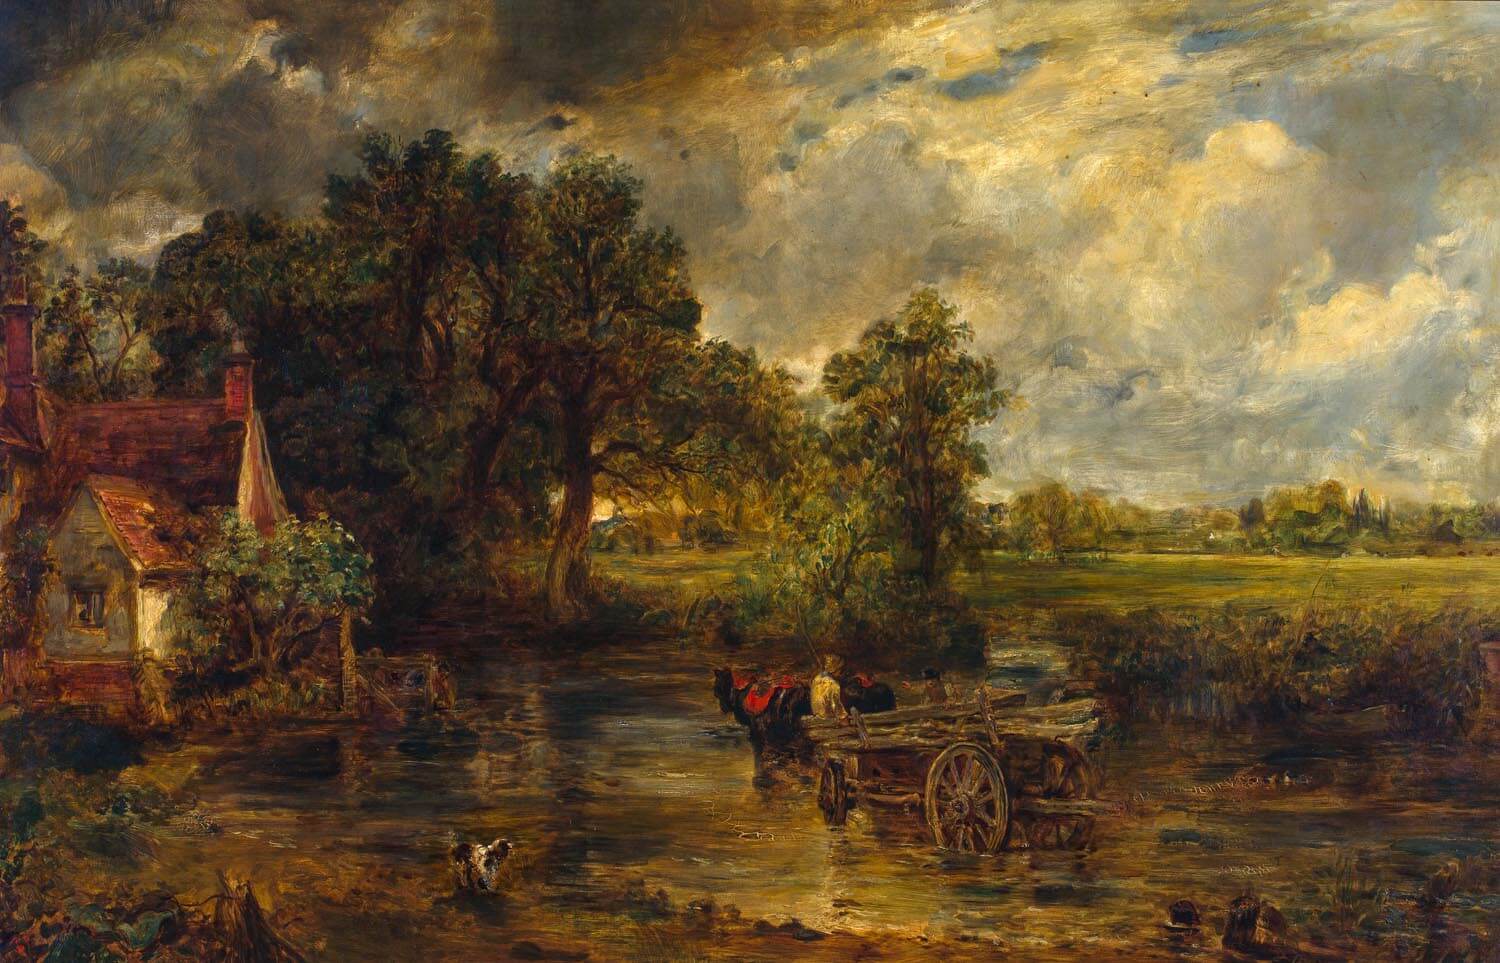 What is Romanticism in Art The Haywain by John Constable Romanticism paintings